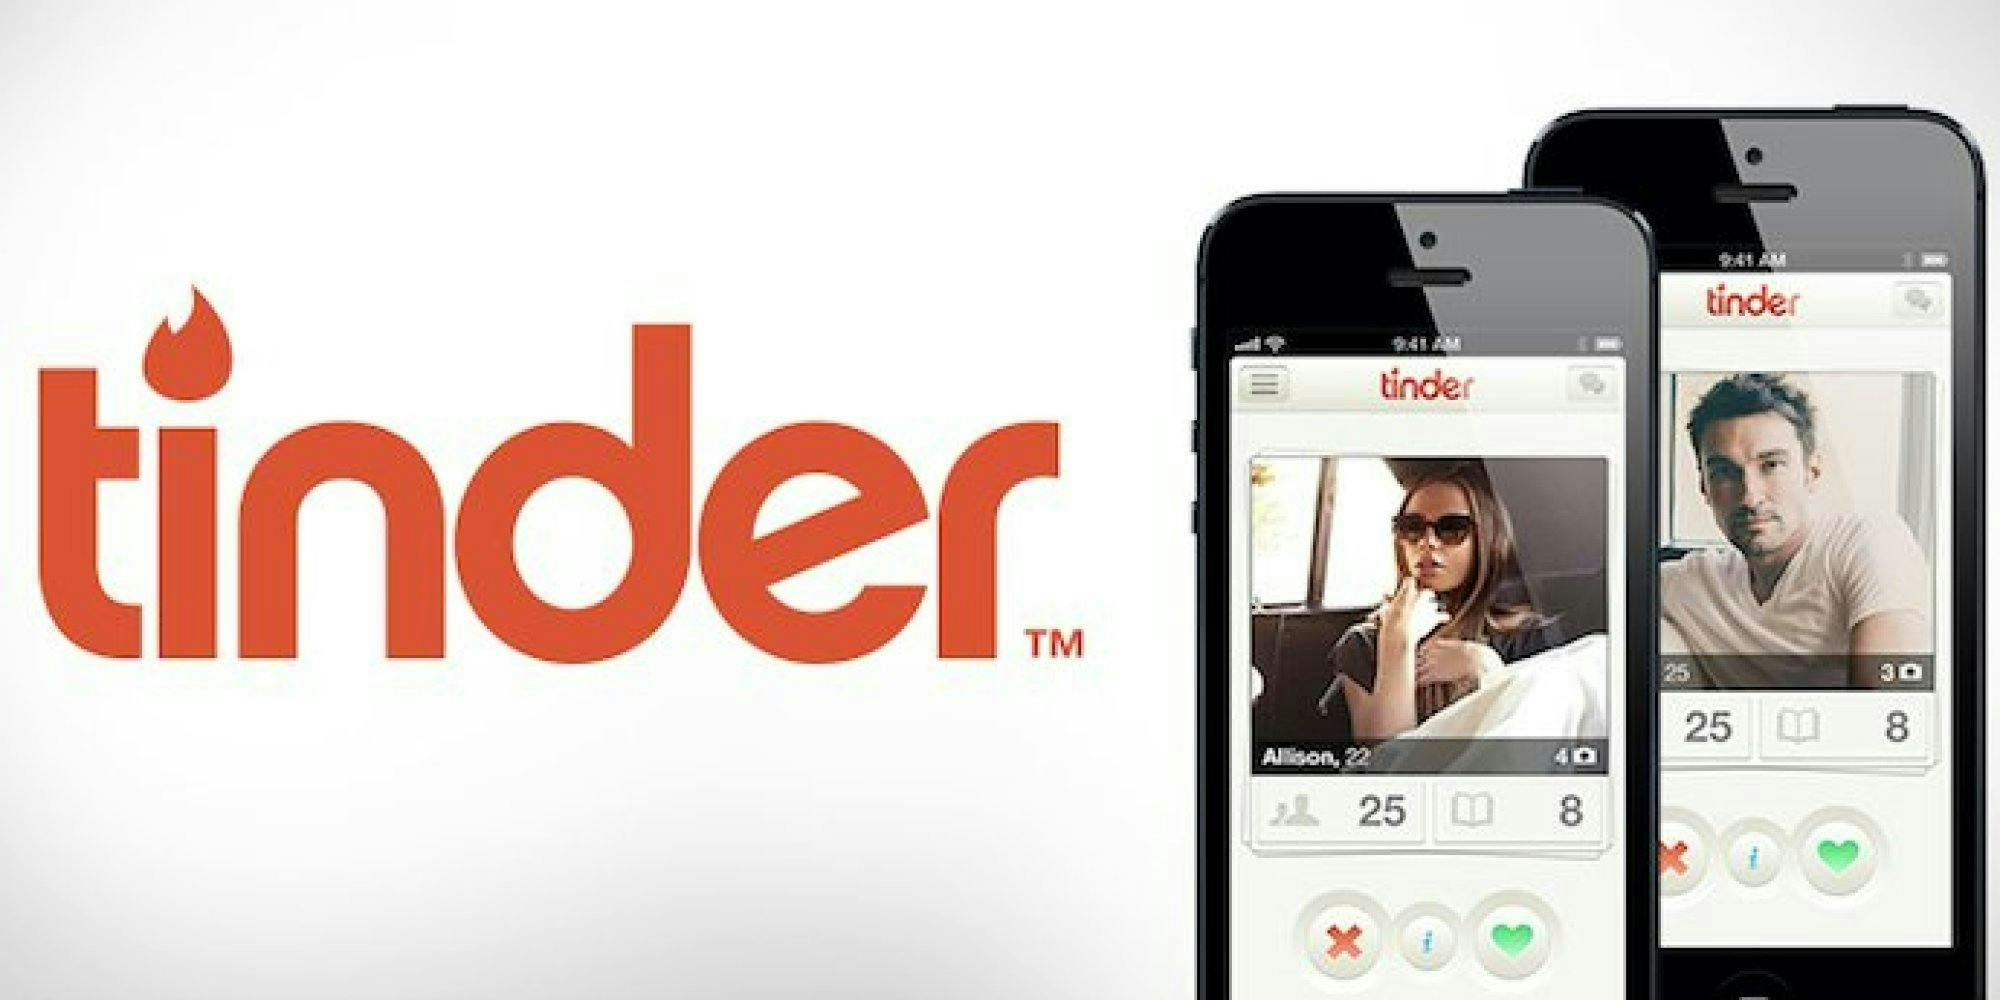 Is Tinder destroying bars? and other telephone technoholic questions